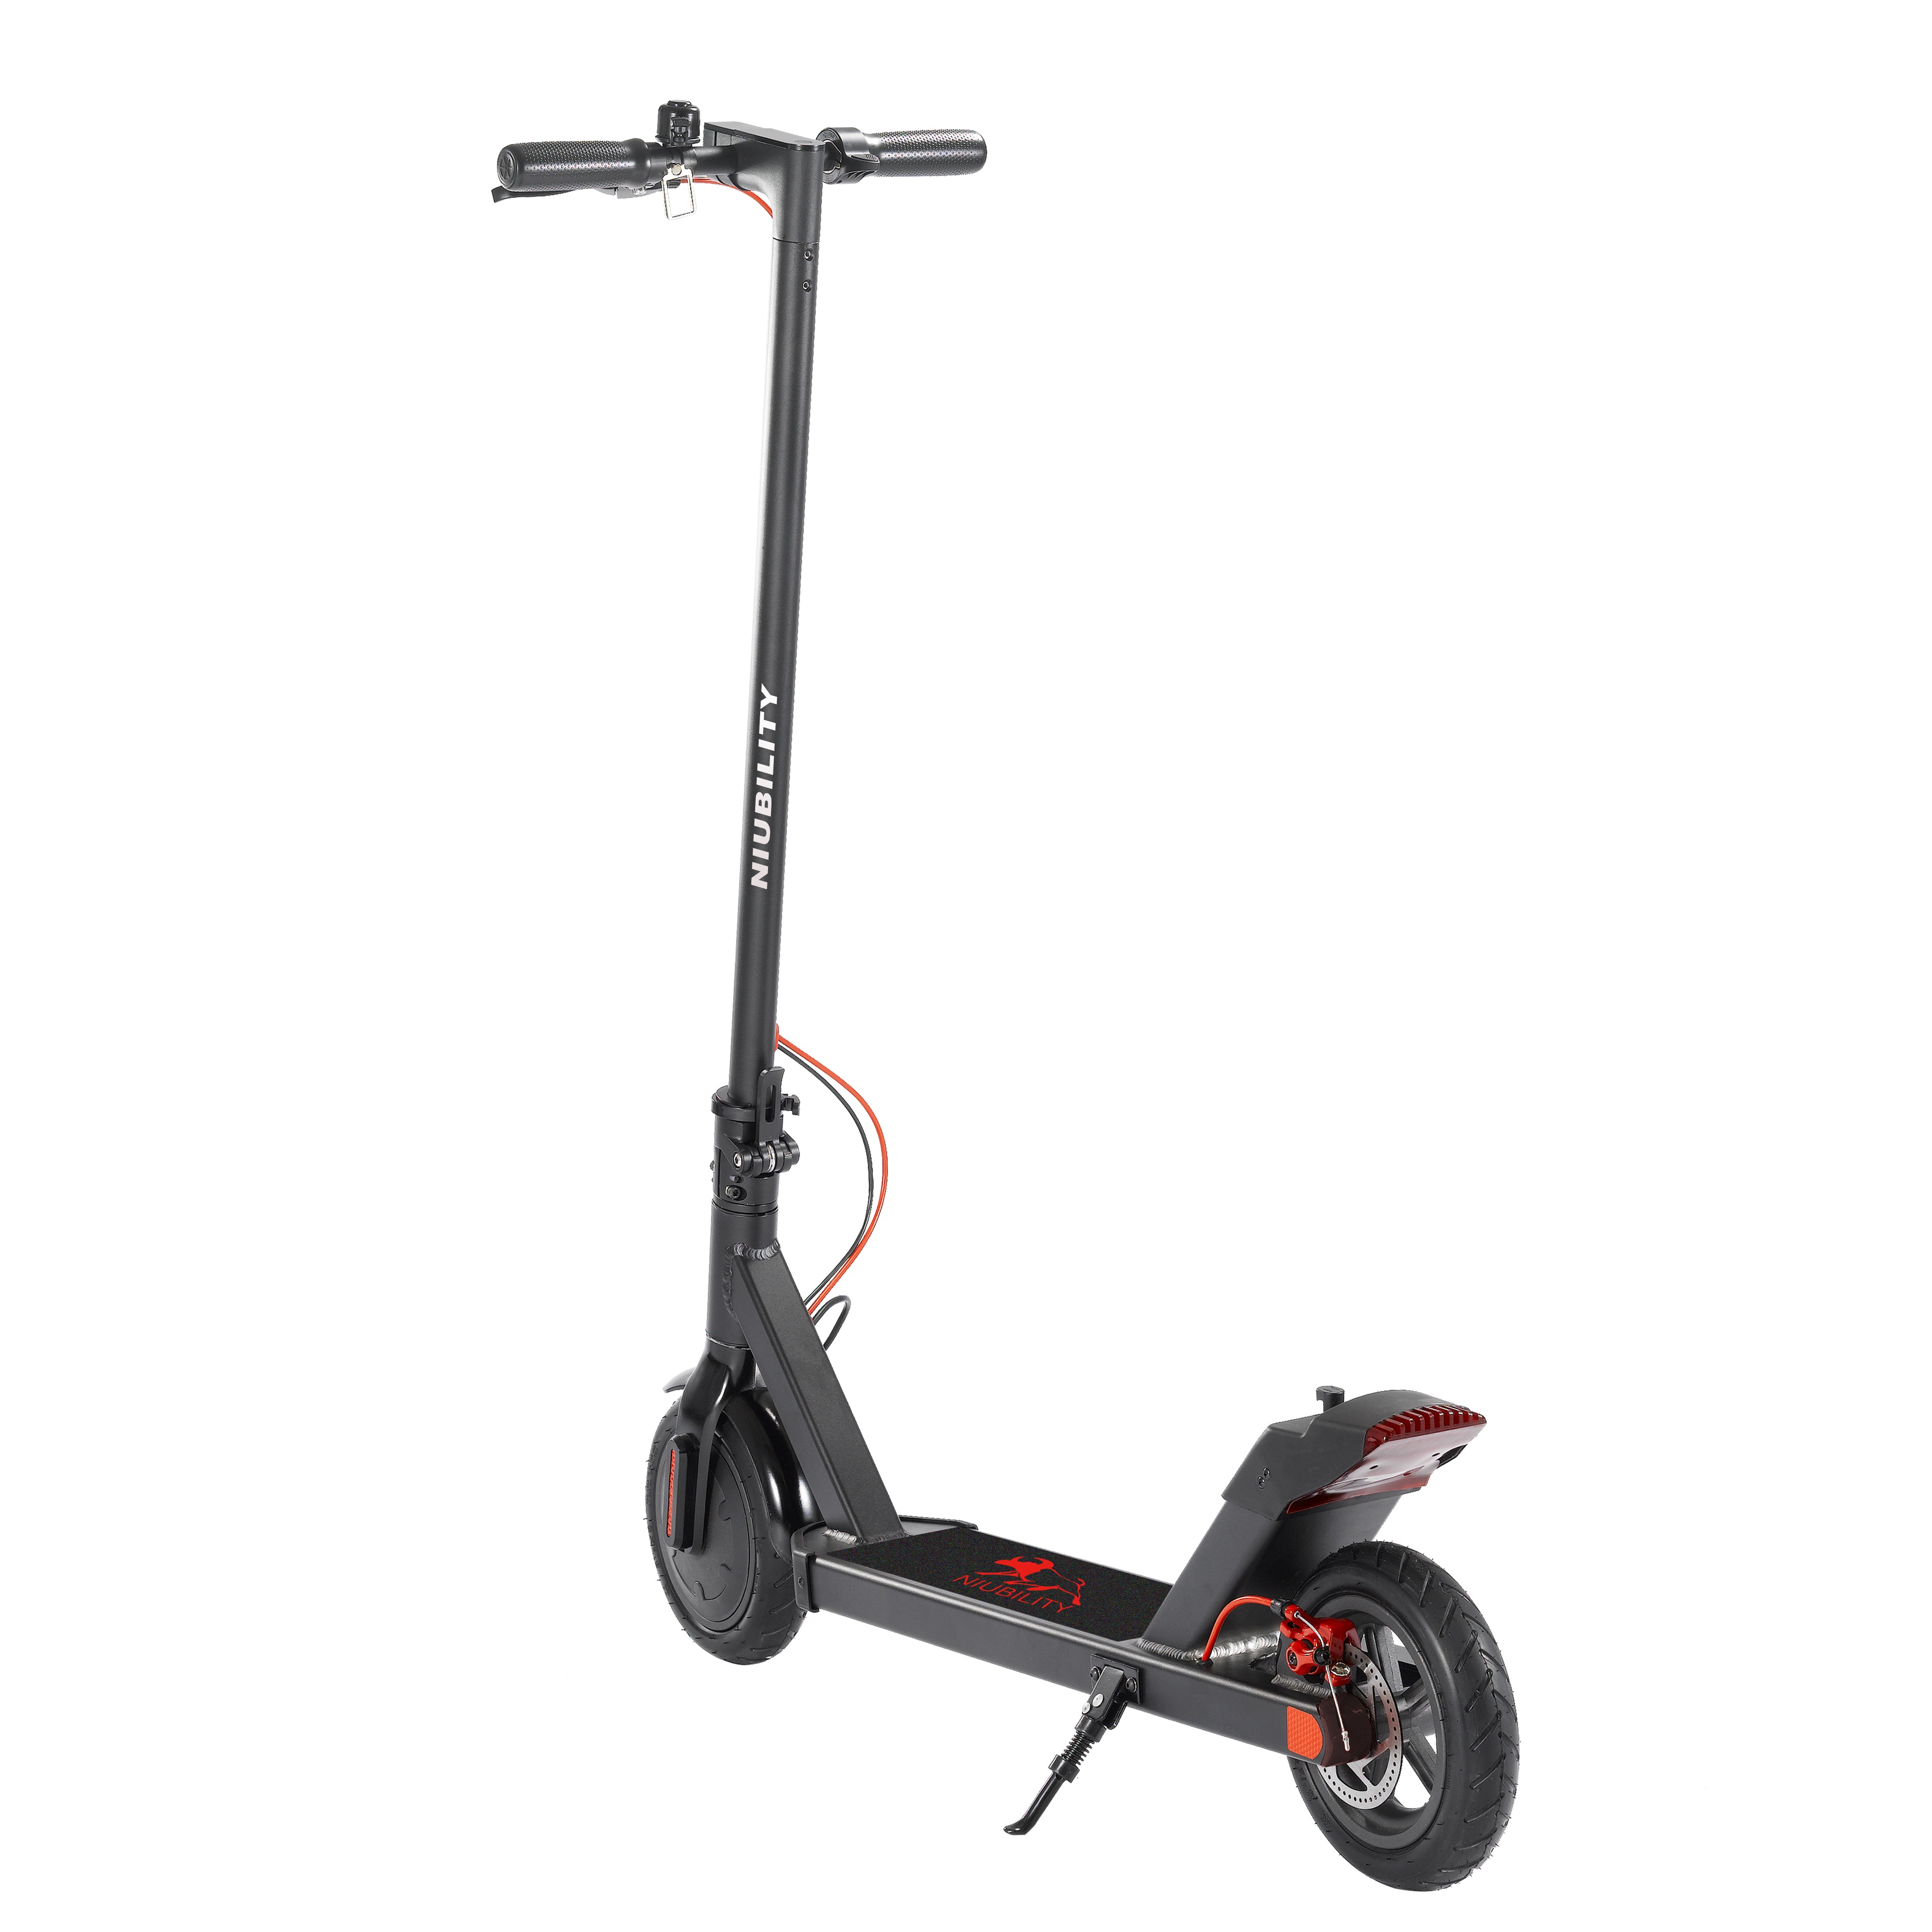 Find Ship To UK Niubility N1 7 8Ah 36V 250W 8 5 Inches Tires Folding Electric Scooter 25km/h Top Speed 20 25KM Mileage Range Electric Scooter for Sale on Gipsybee.com with cryptocurrencies